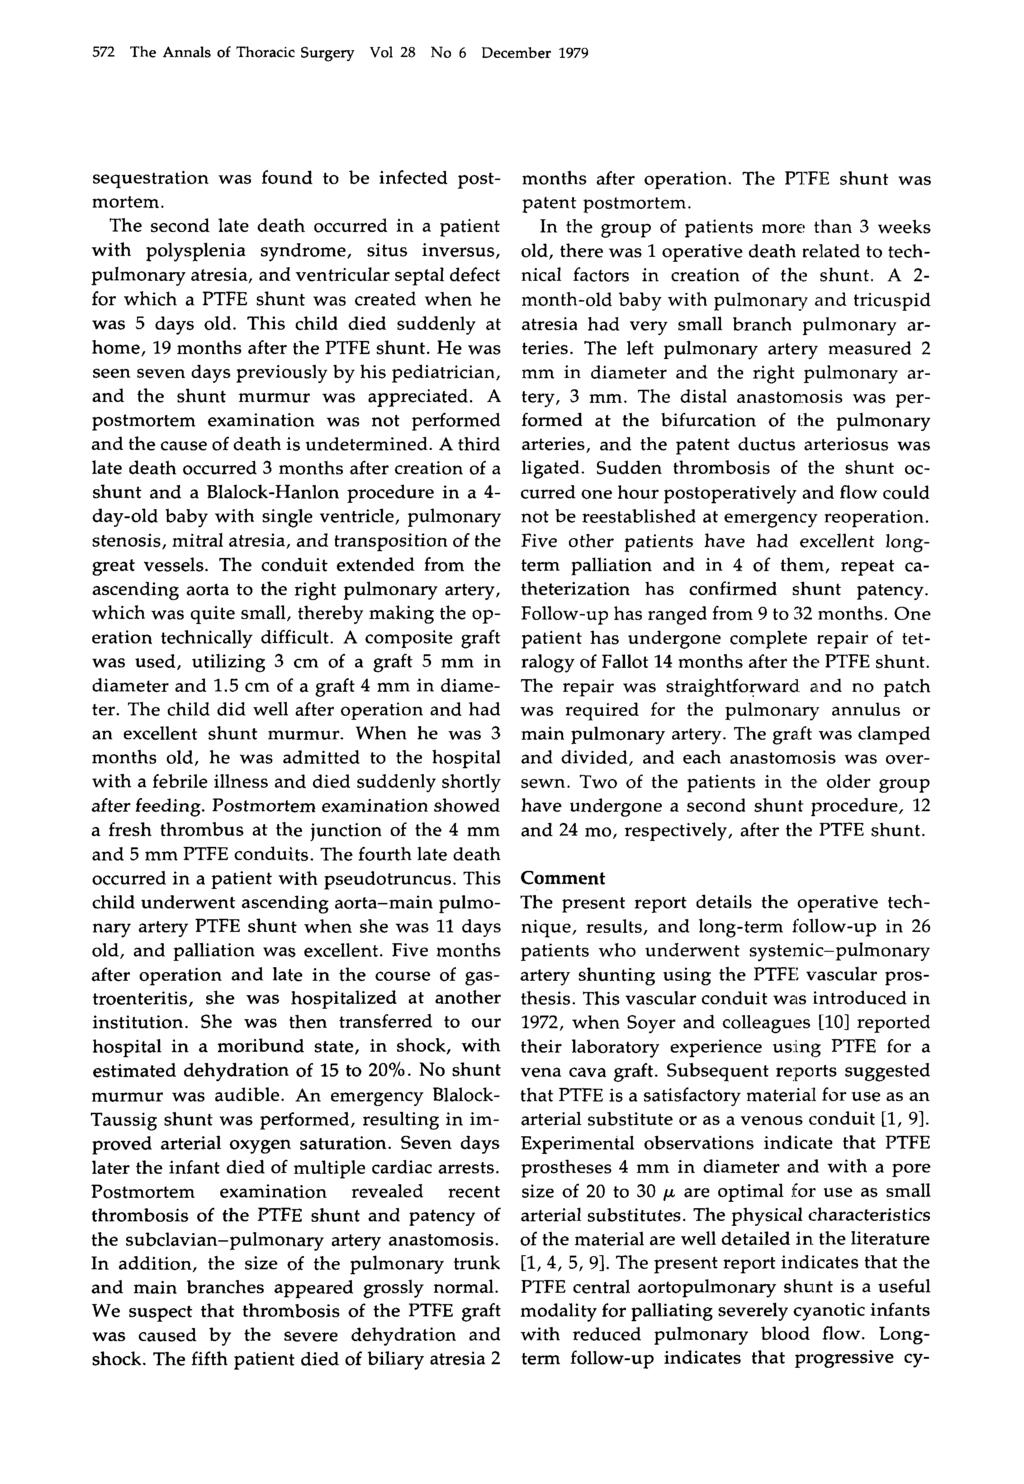 572 The Annals of Thoracic Surgery Vol 28 No 6 December 1979 sequestration was found to be infected postmortem.